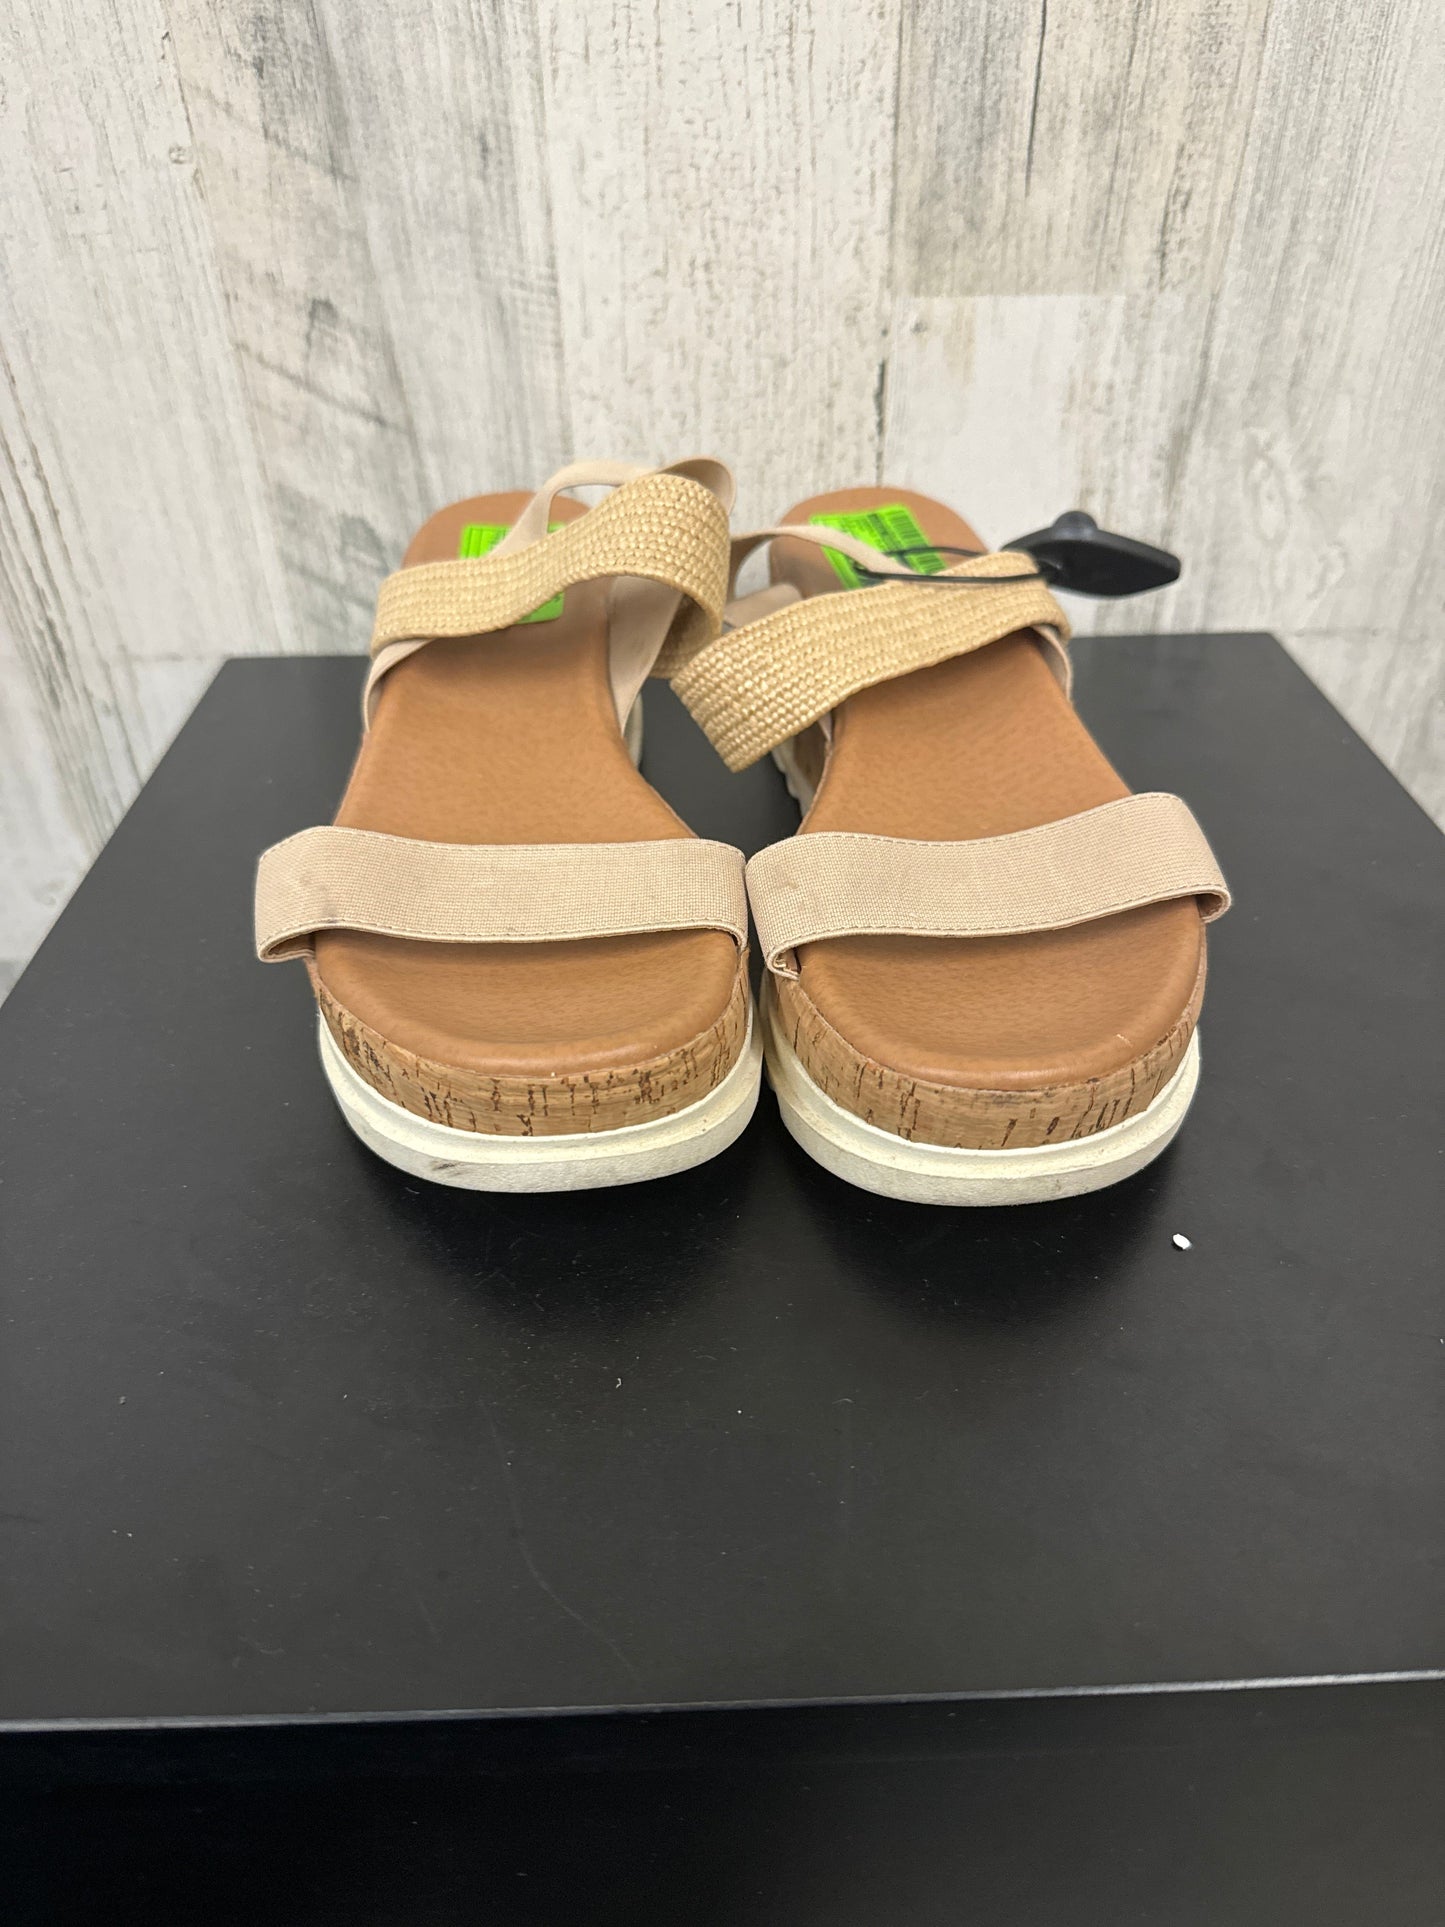 Sandals Flats By Steve Madden  Size: 9.5